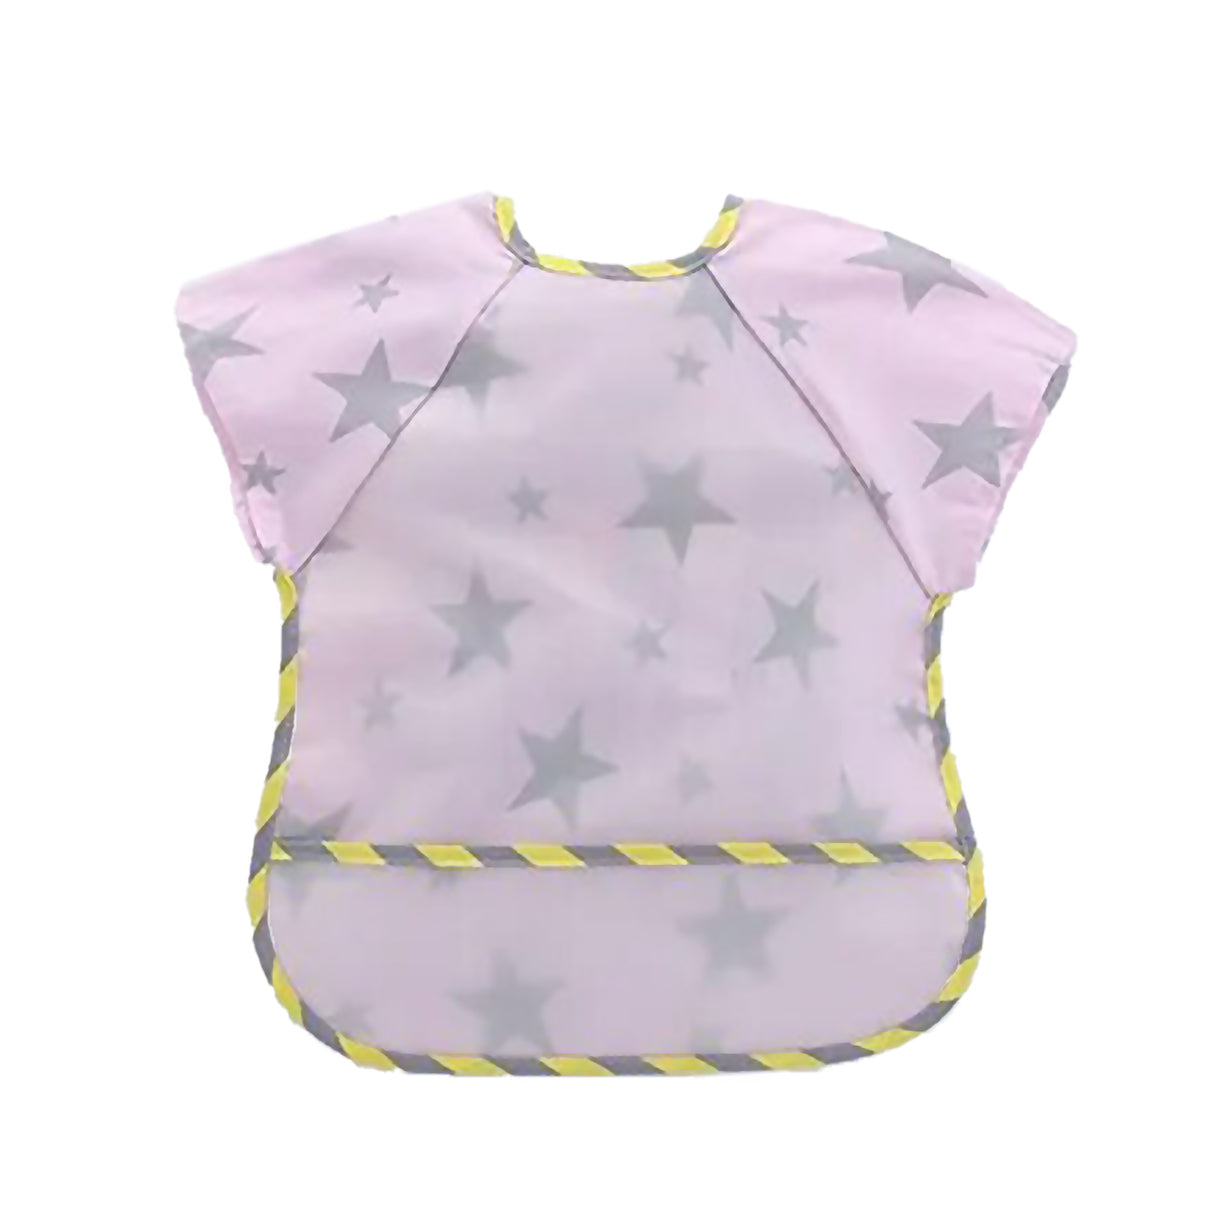 Durable And Reusable Knotted Waterproof Bibs